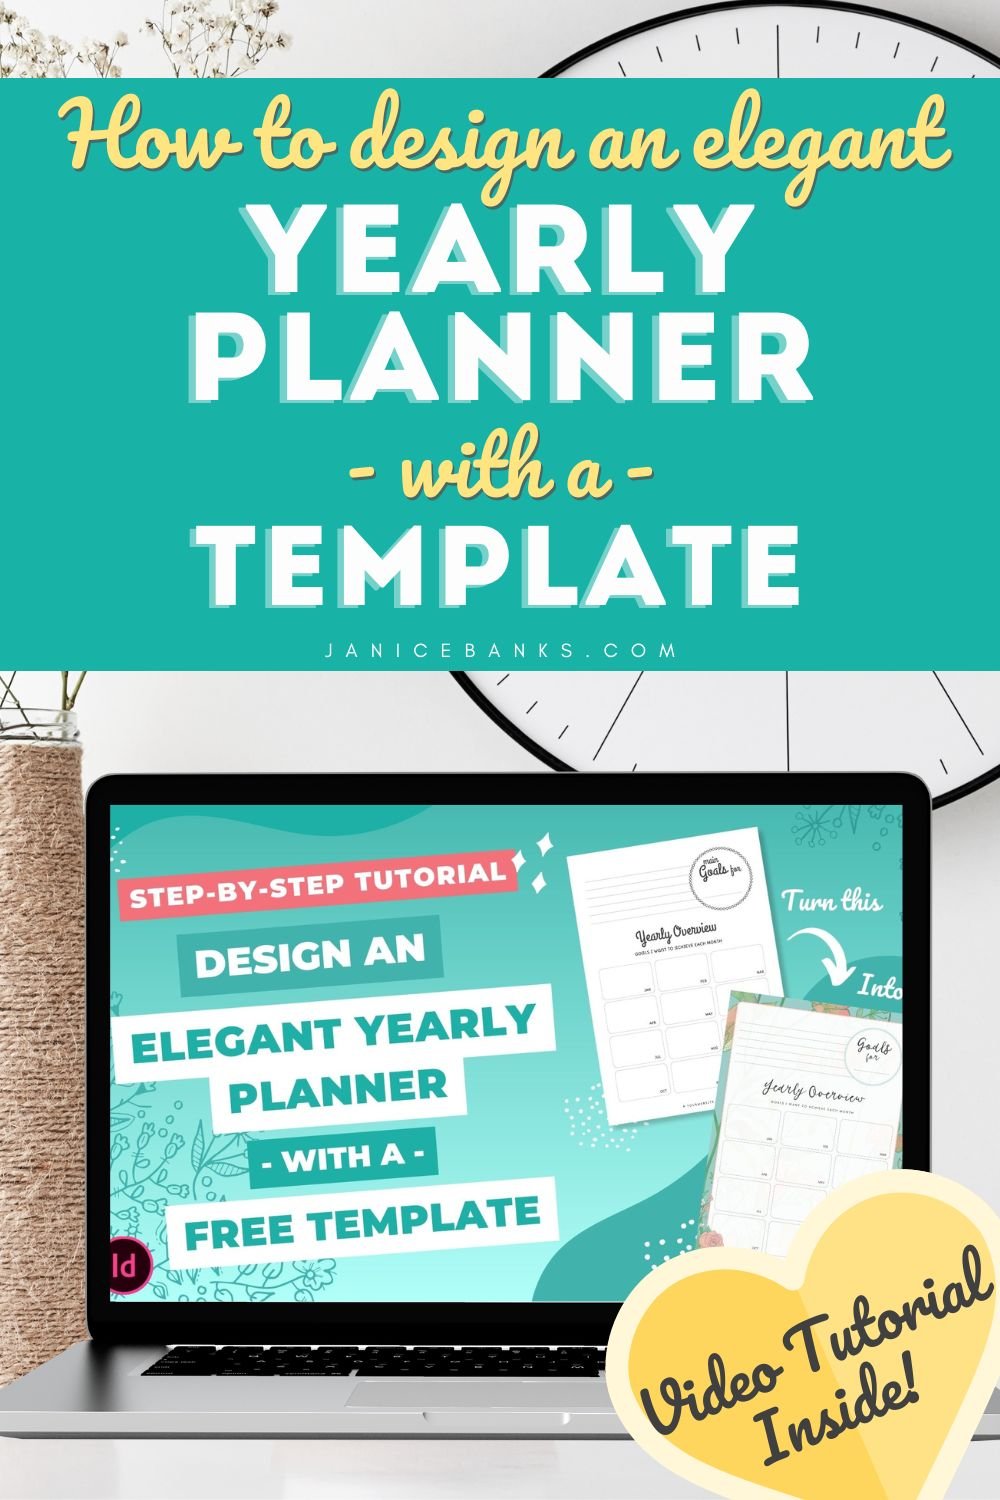 How to Design an Elegant Yearly Planner with a Template